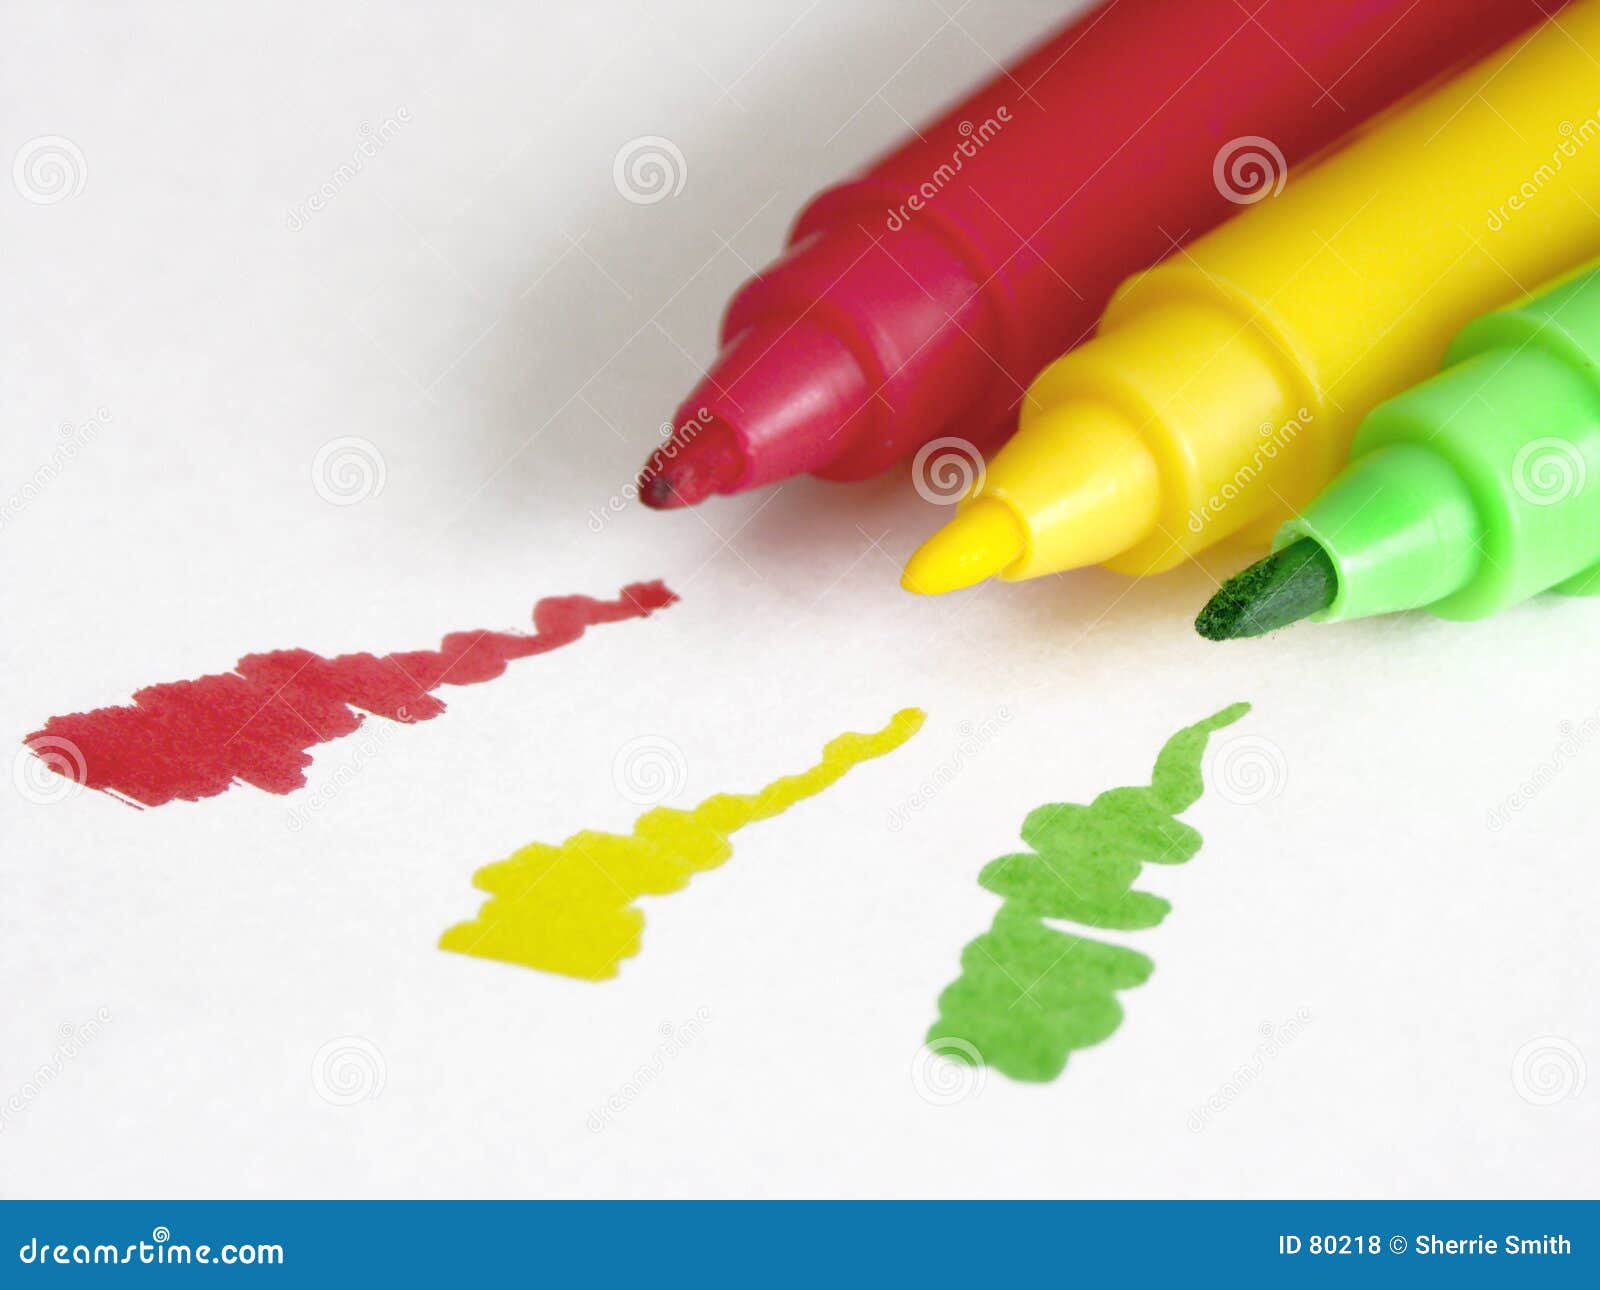 https://thumbs.dreamstime.com/z/colorful-markers-80218.jpg